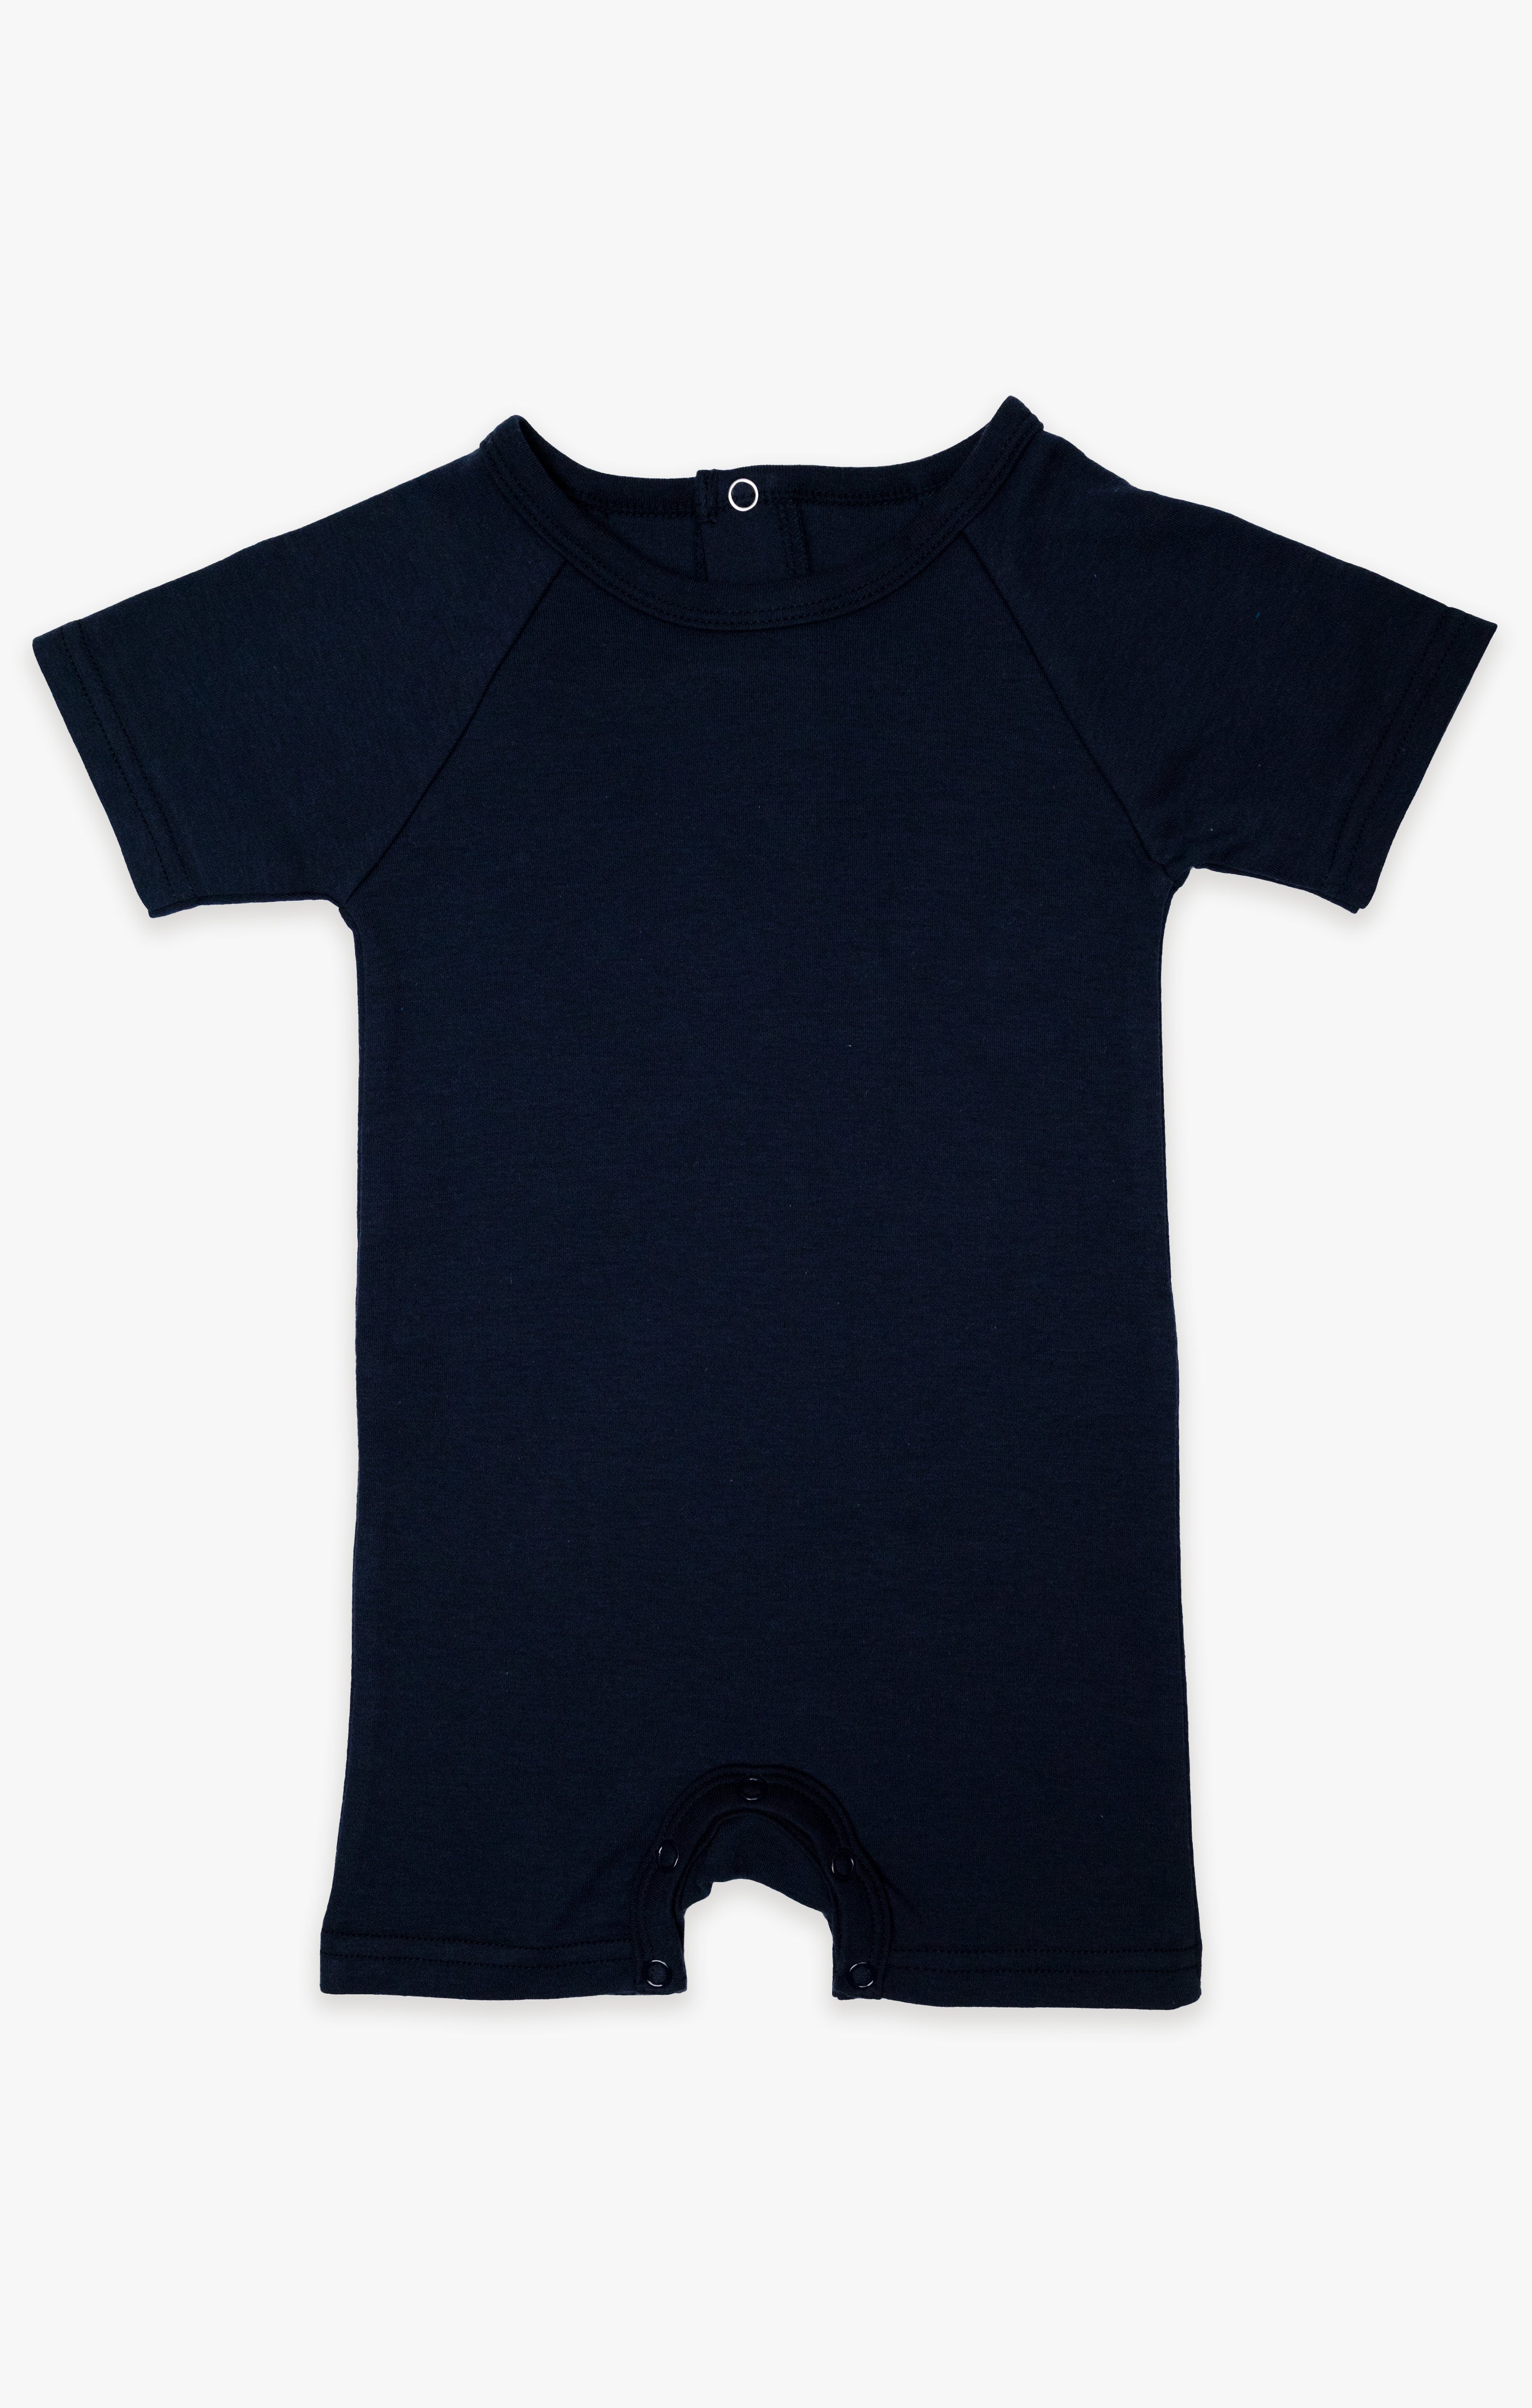 Navy Organic French Terry Cotton Baby Romper